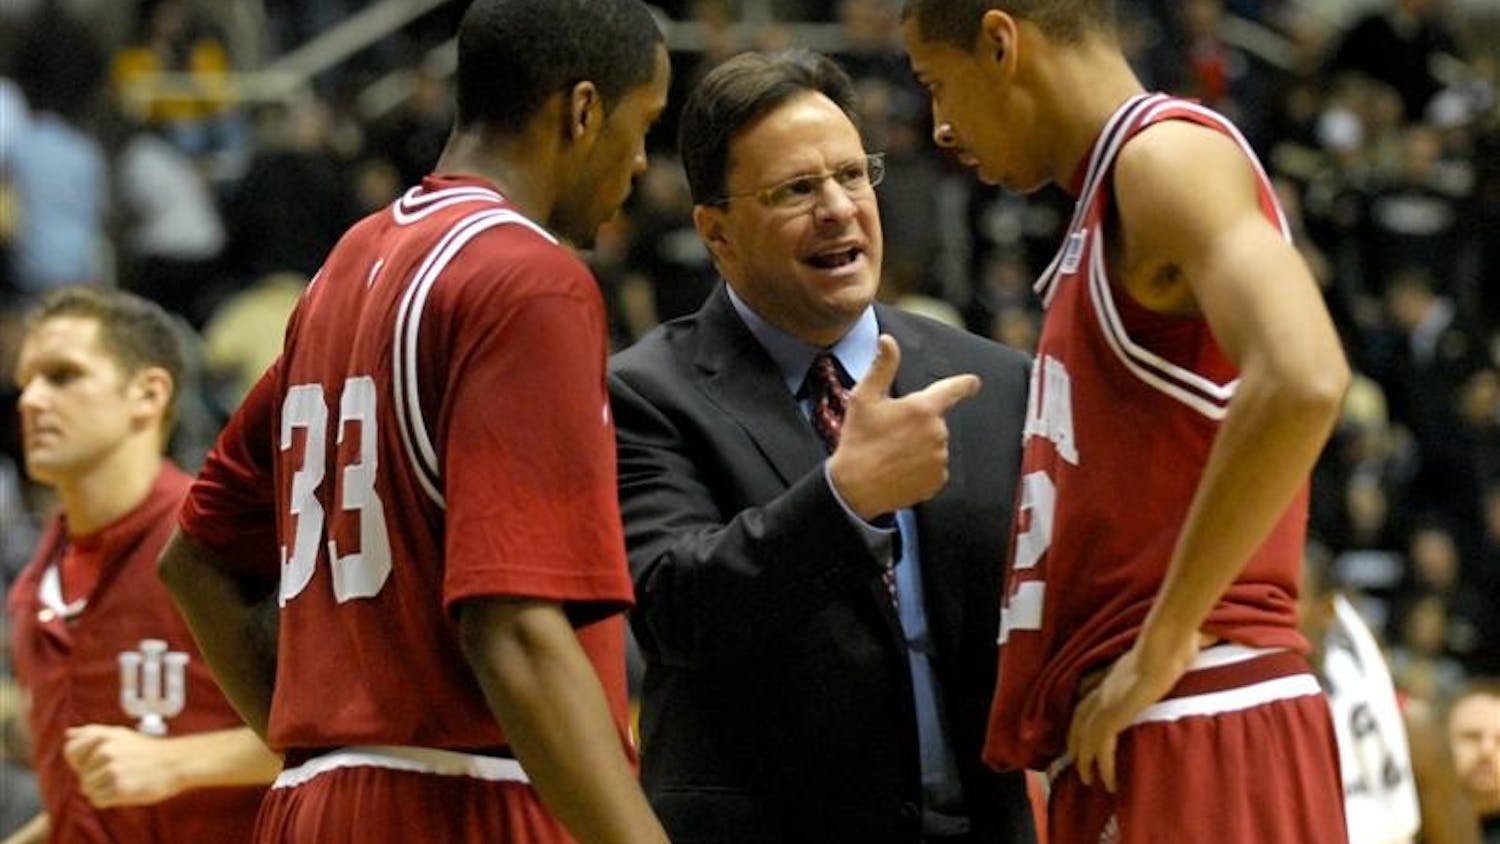 After failing to get a last second shot off before halftime, IU coach Tom Crean discusses the play with Devan Dumes (left) and Verdell Jones (right) before heading into the locker room.